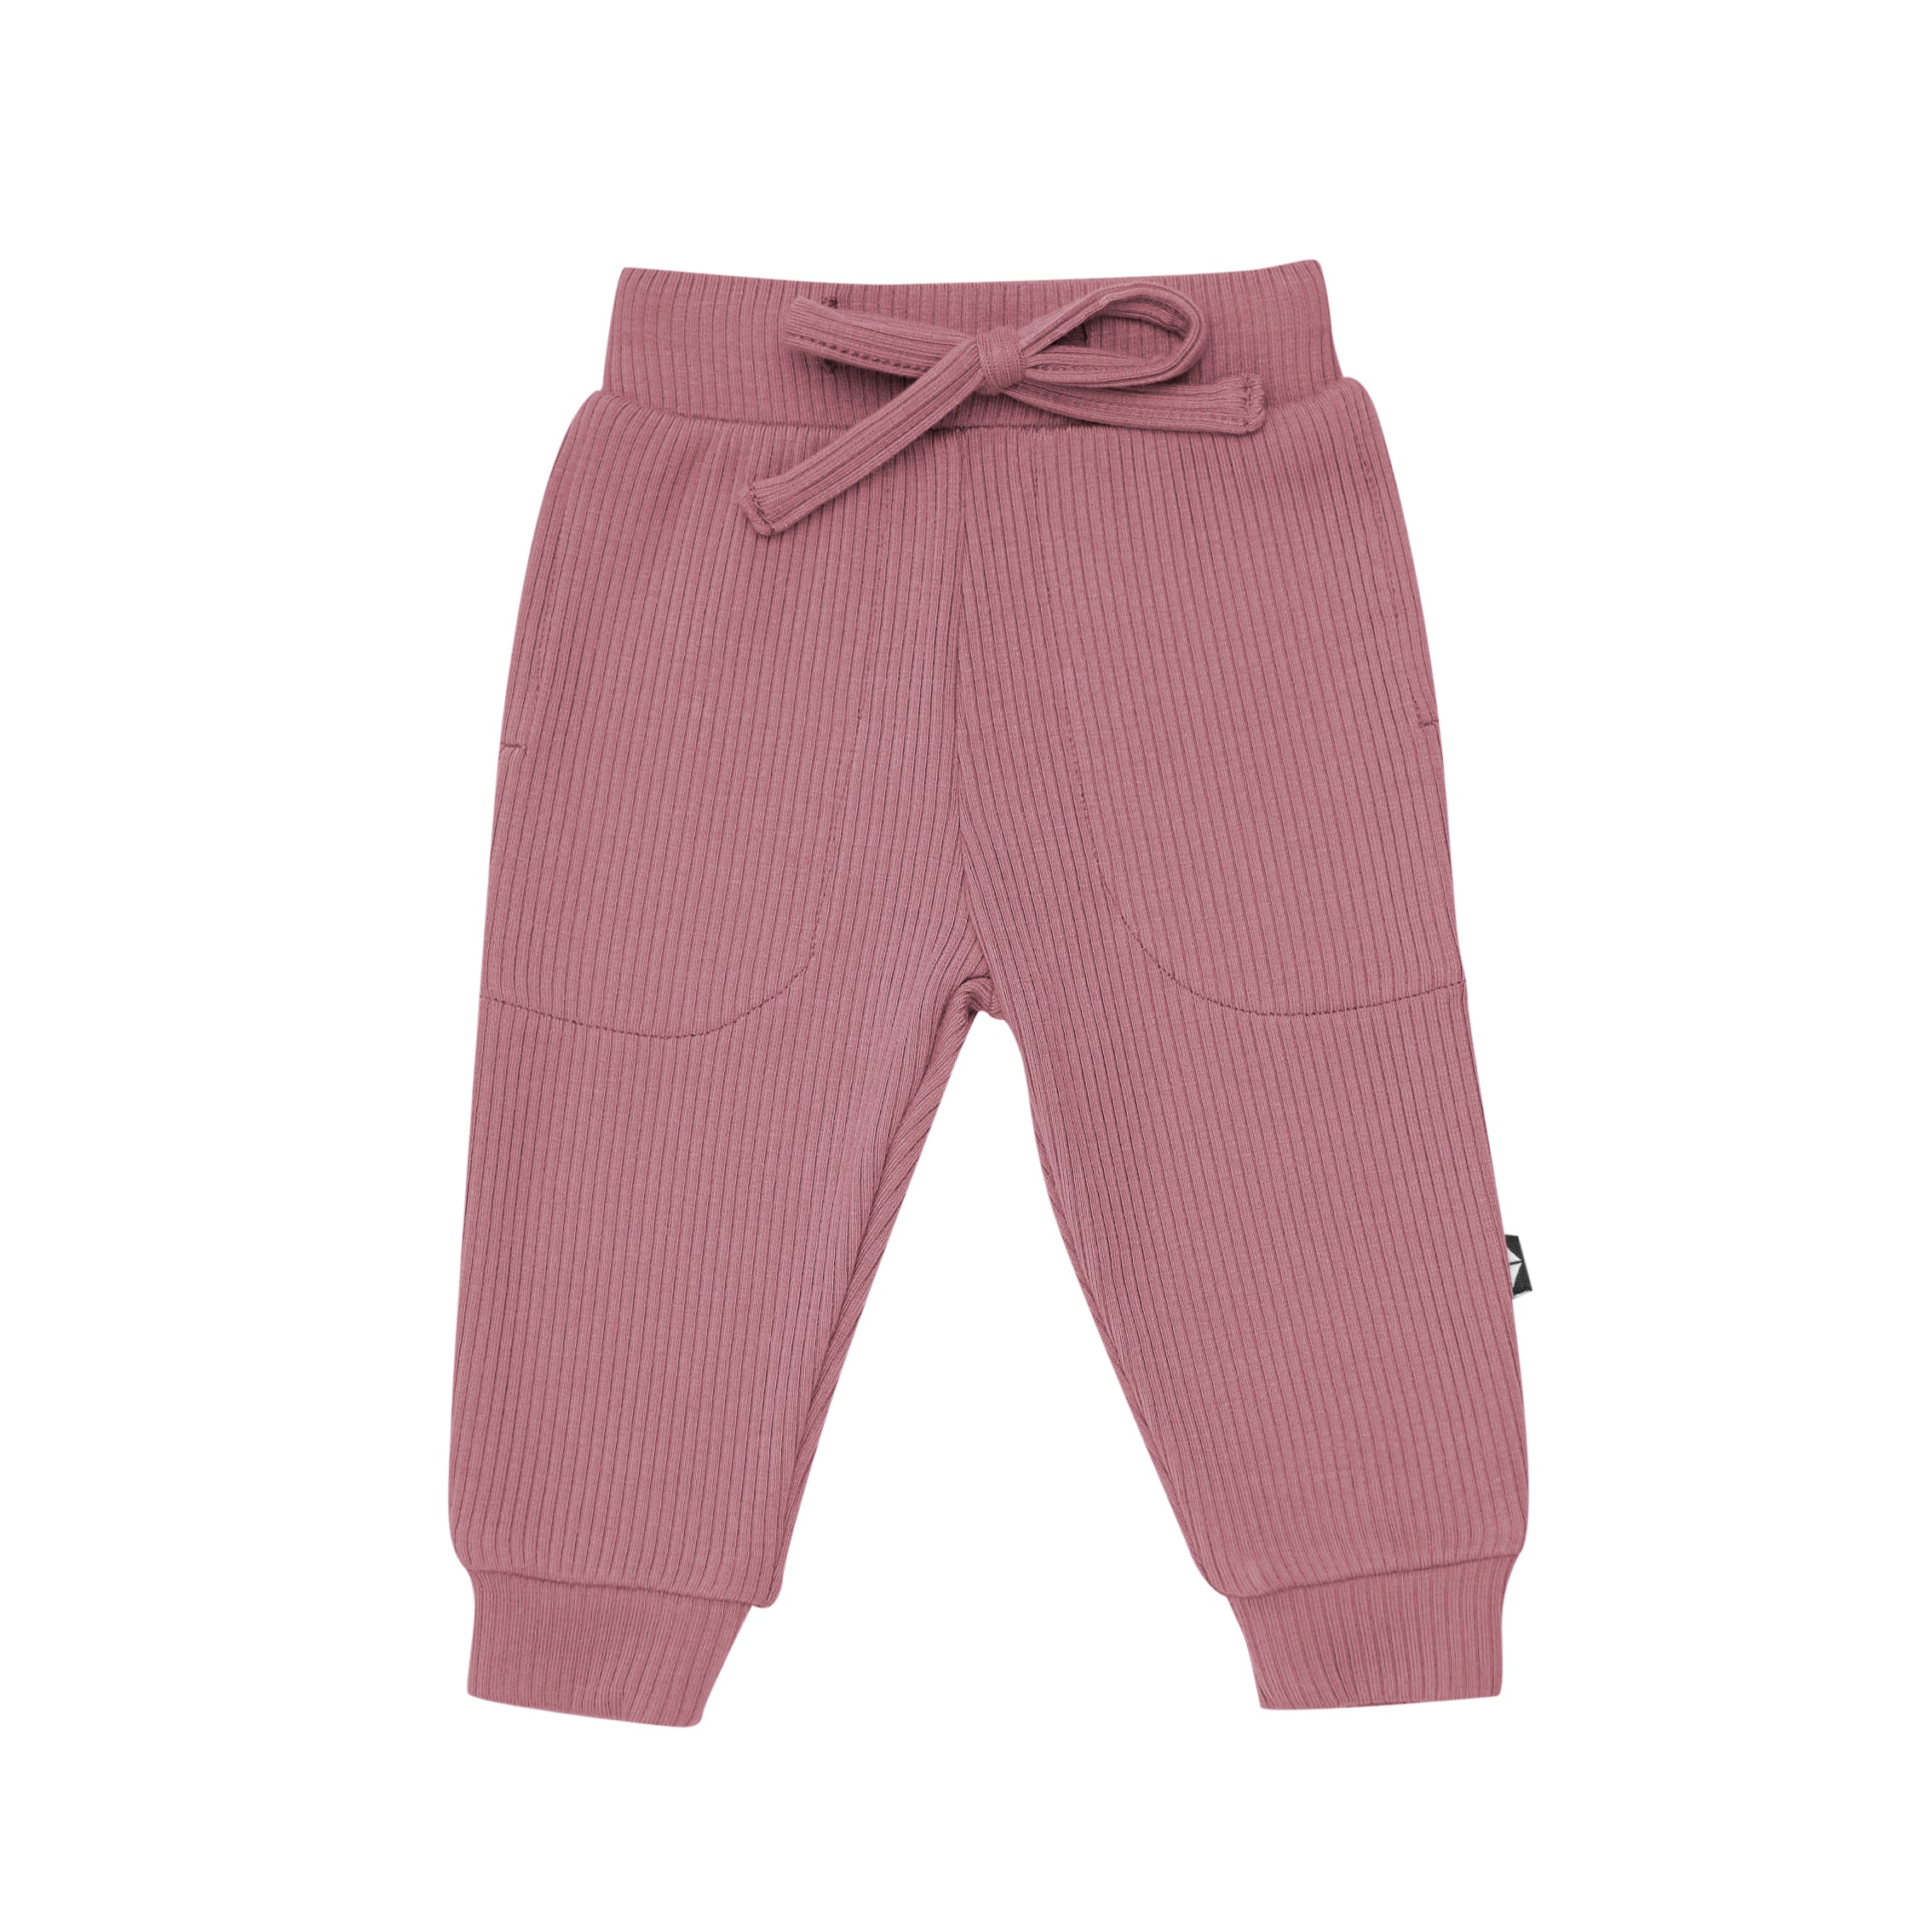 Ribbed Jogger Pant in Dusty Rose